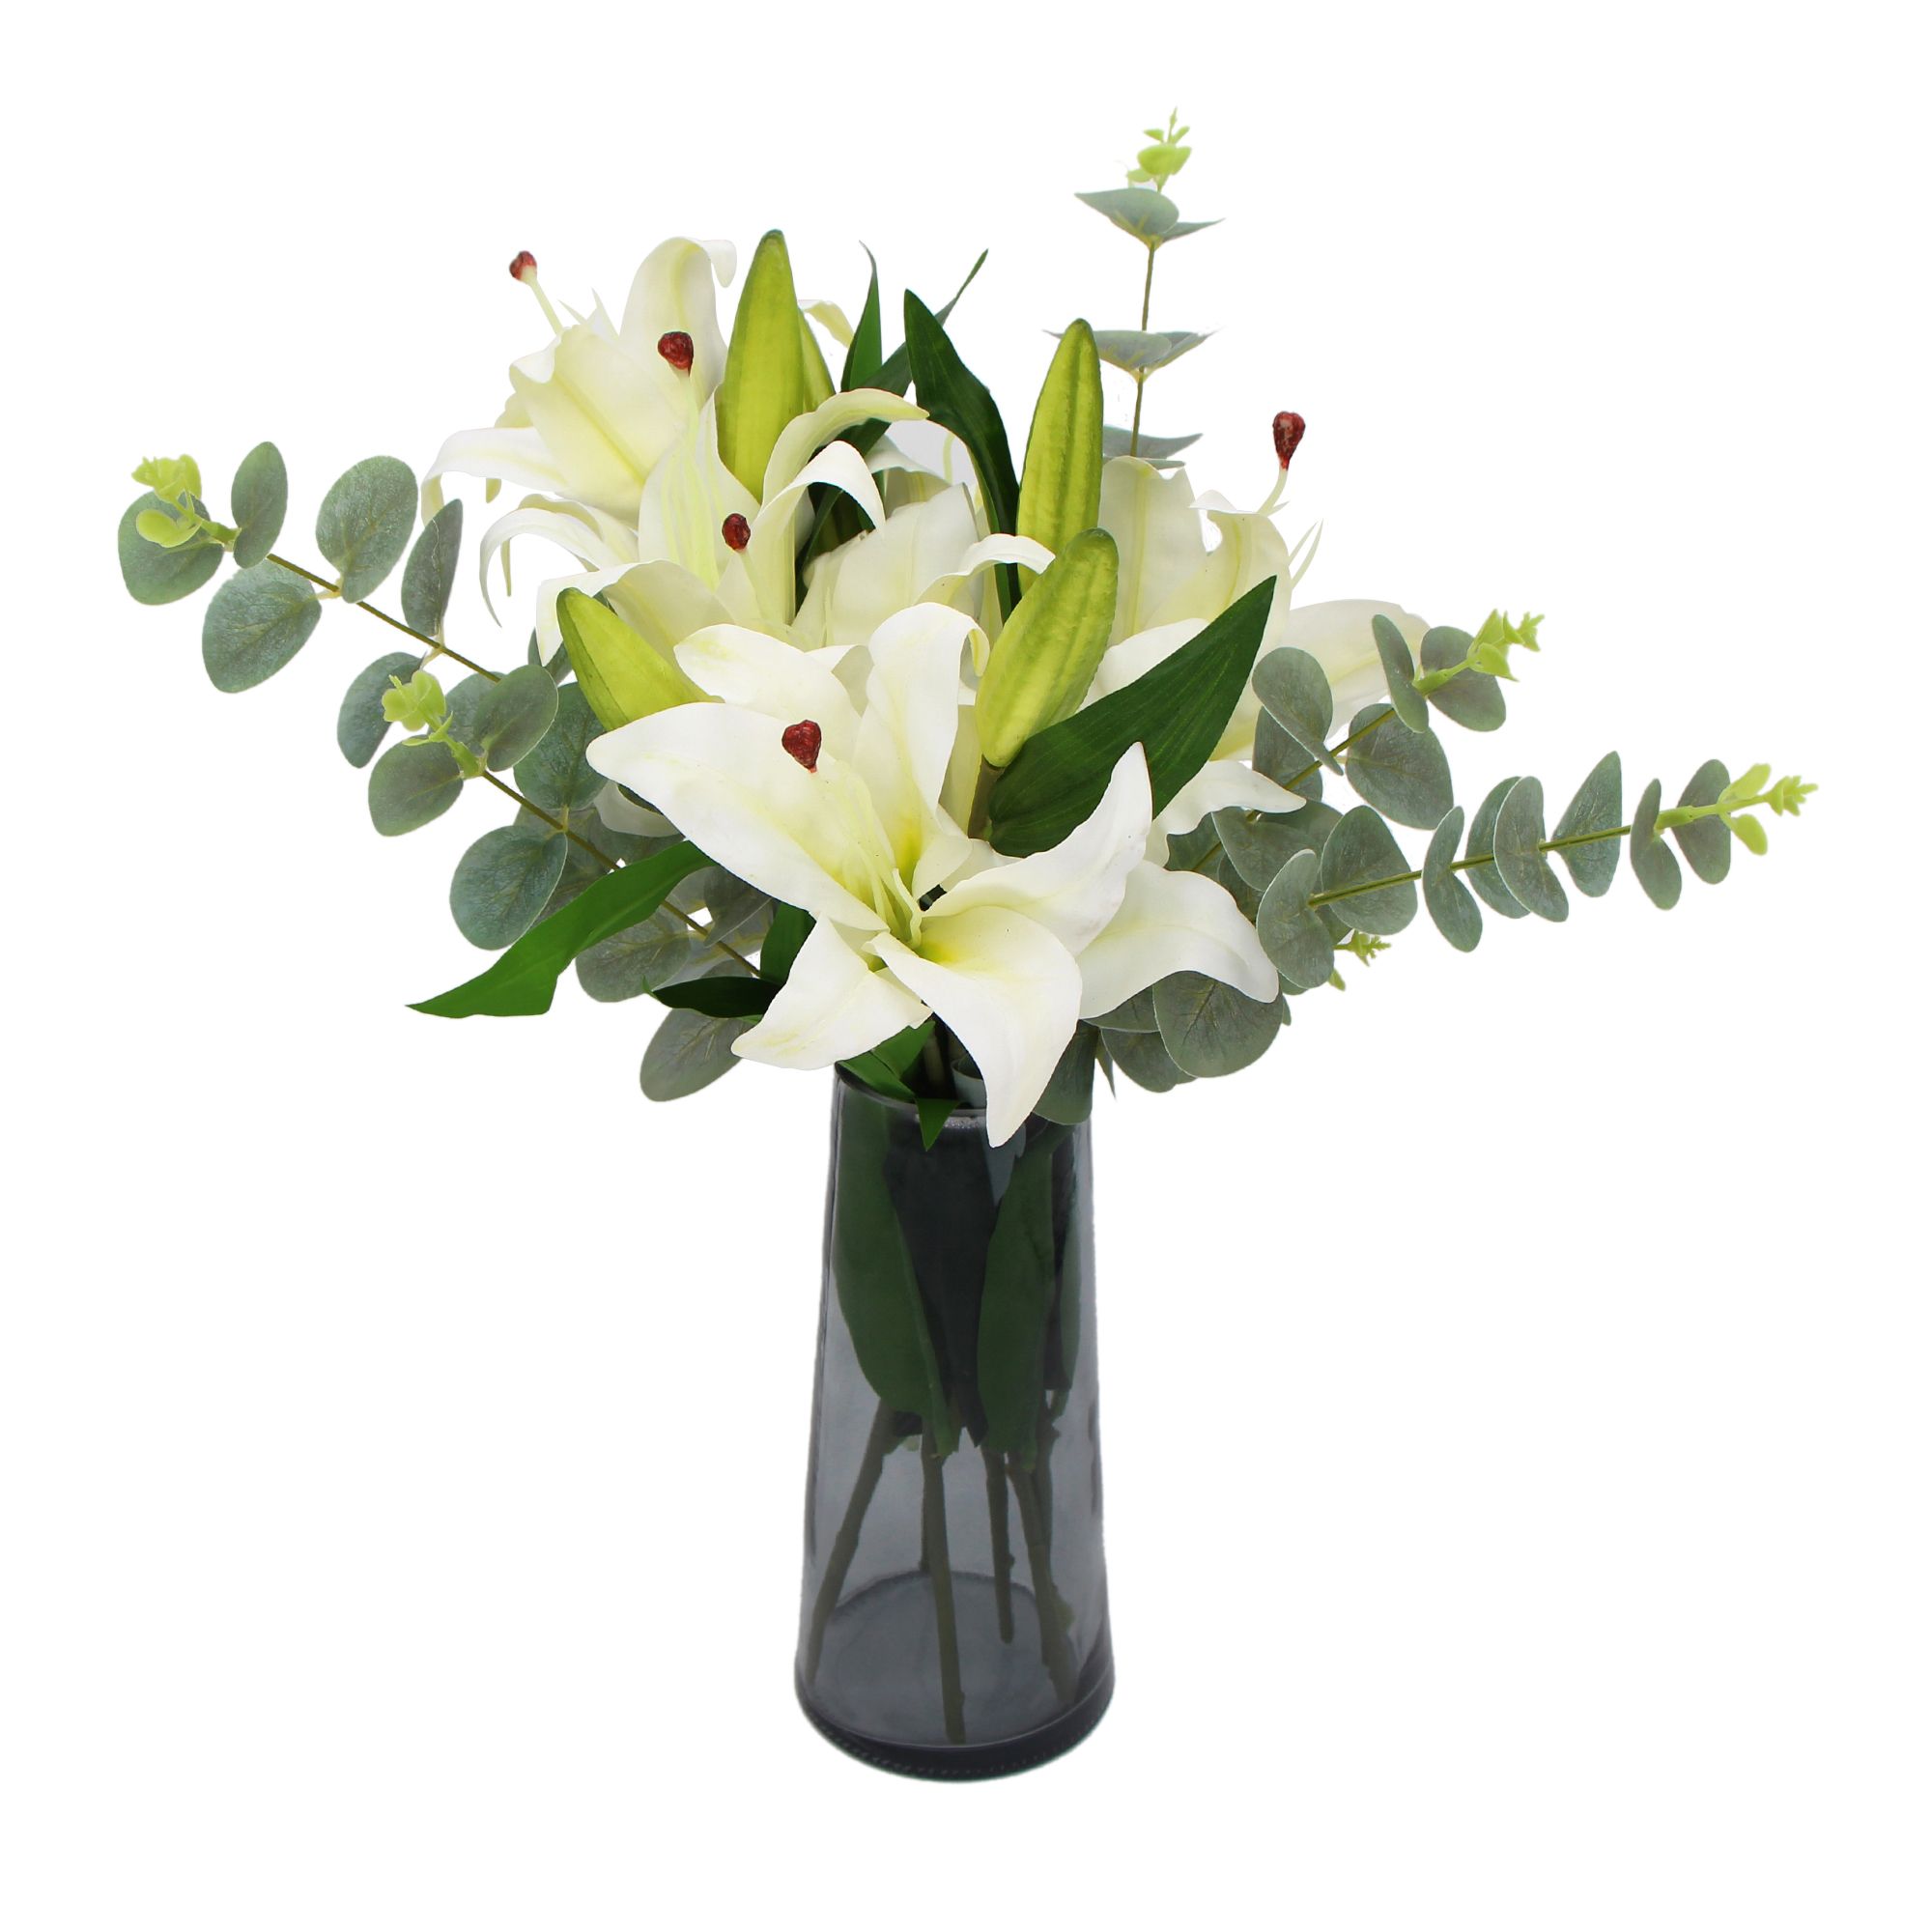 Premium Faux Lily In Glass Vase (Artificial Tiger Lily Arrangement) – Green and White